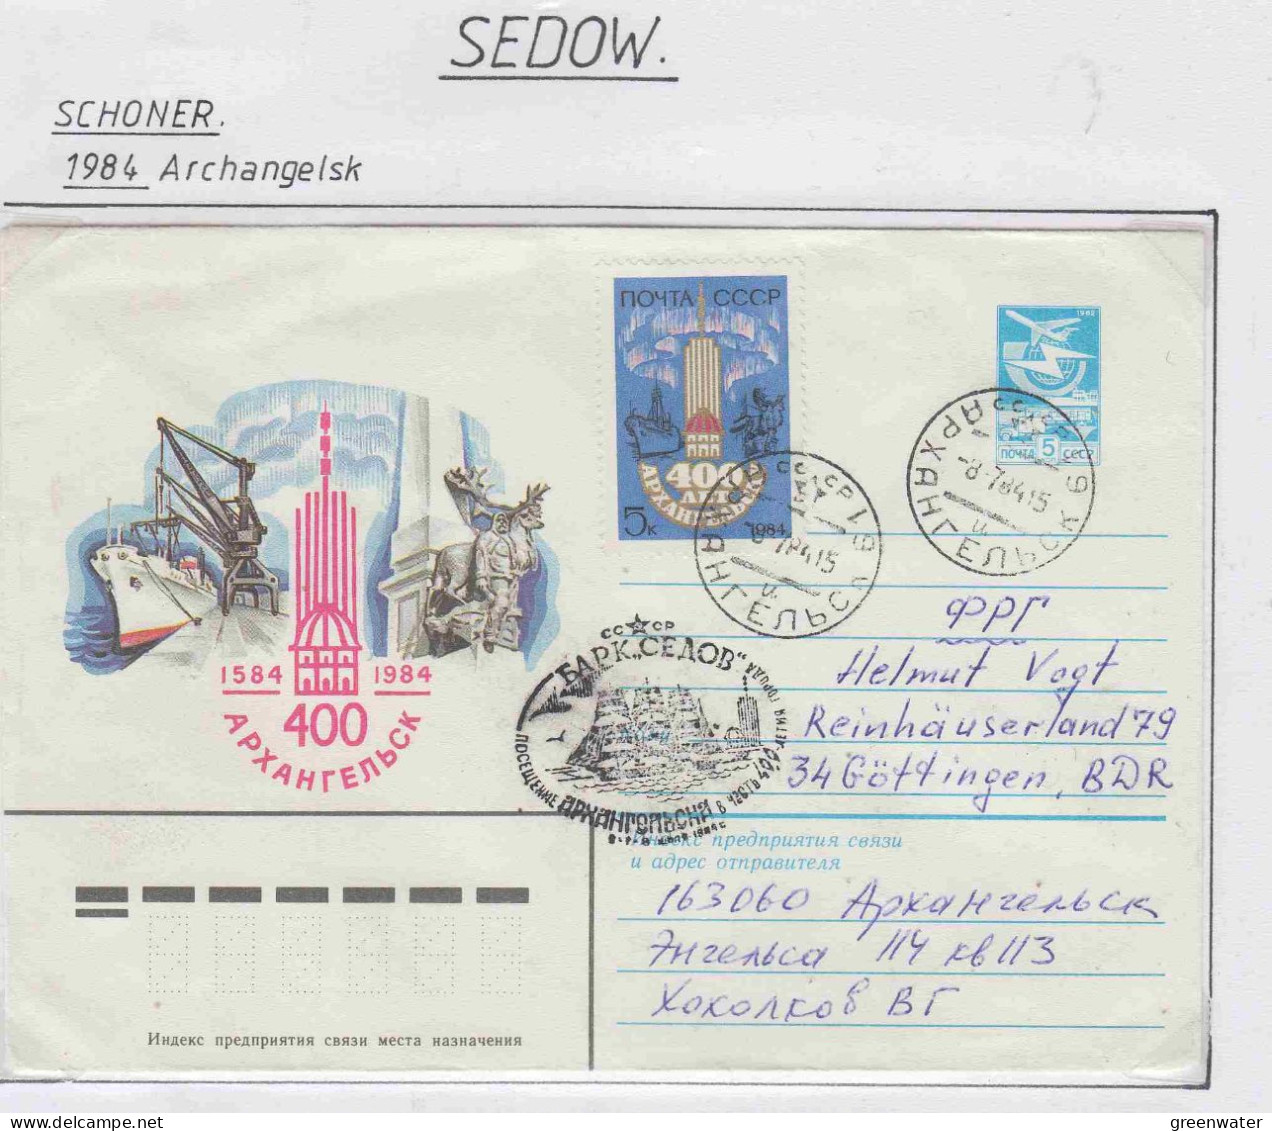 Russia Schoner Sedow Ca Archangelsk 8.07.1984 (OR150) - Navires & Brise-glace